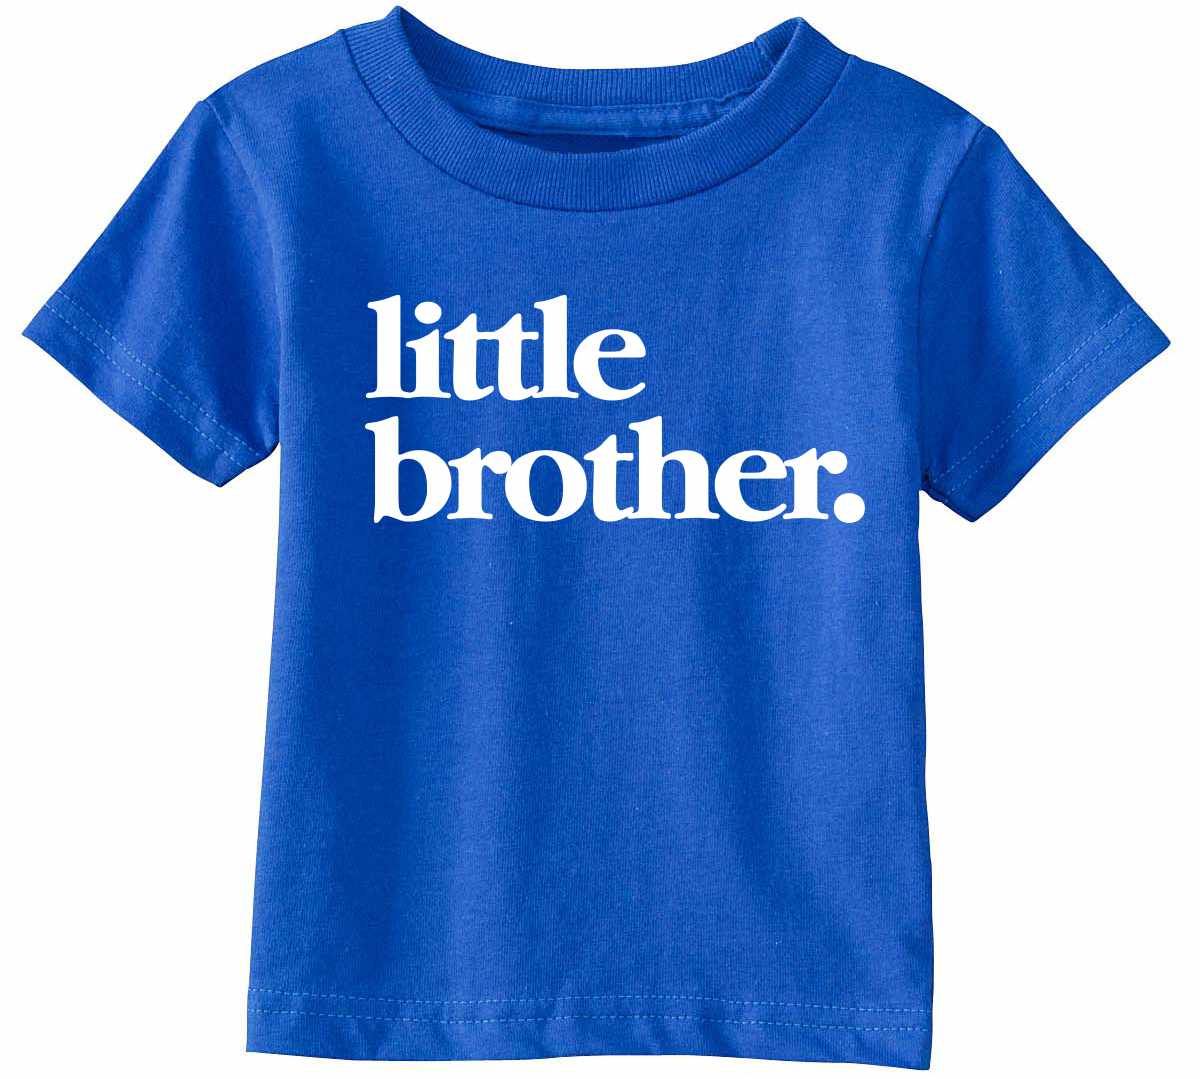 Little Brother on Infant-Toddler T-Shirt (#1322-7)